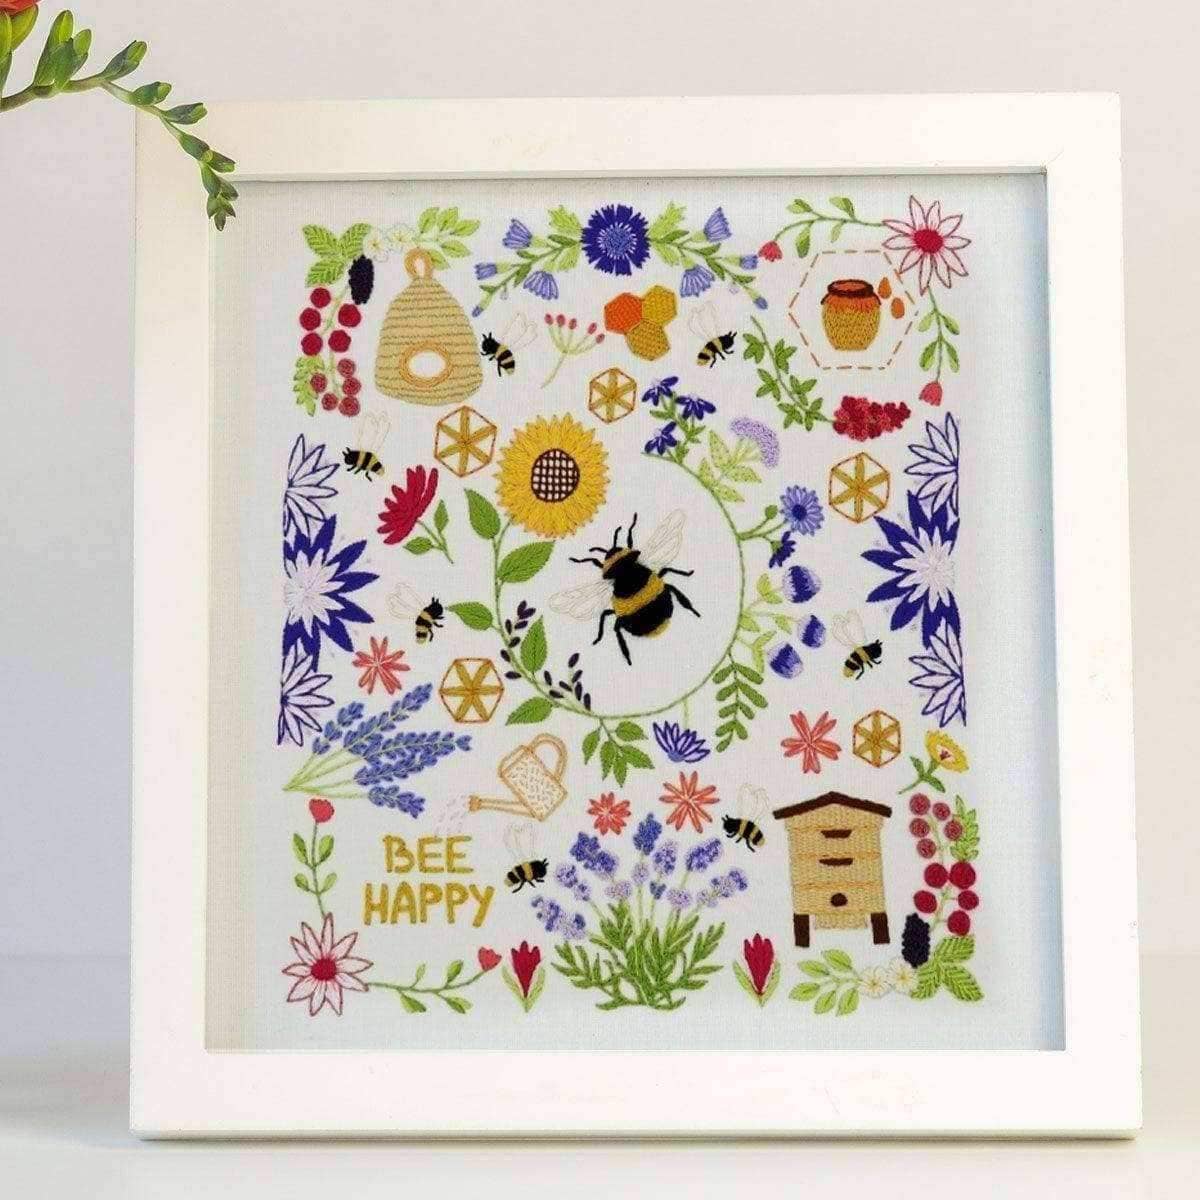 Bees and Blossoms Hand Embroidery Kit , Embroidery Kit , StitchDoodles , BEE EMBROIDERY, Bees and Blossoms, bird embroidery, Embroidery, embroidery hoop, embroidery hoop kit, Embroidery Kit, embroidery kit for adults, embroidery kit fro beginners, embroidery pattern, hand embroidery, hand embroidery fabric, hand embroidery kit, hand embroidery seat frame, hand embroidery thread, modern embroidery kits, nurge embroidery hoop, Printed Pattern, wildlife embroidery , StitchDoodles , shop.stitchdoodles.com